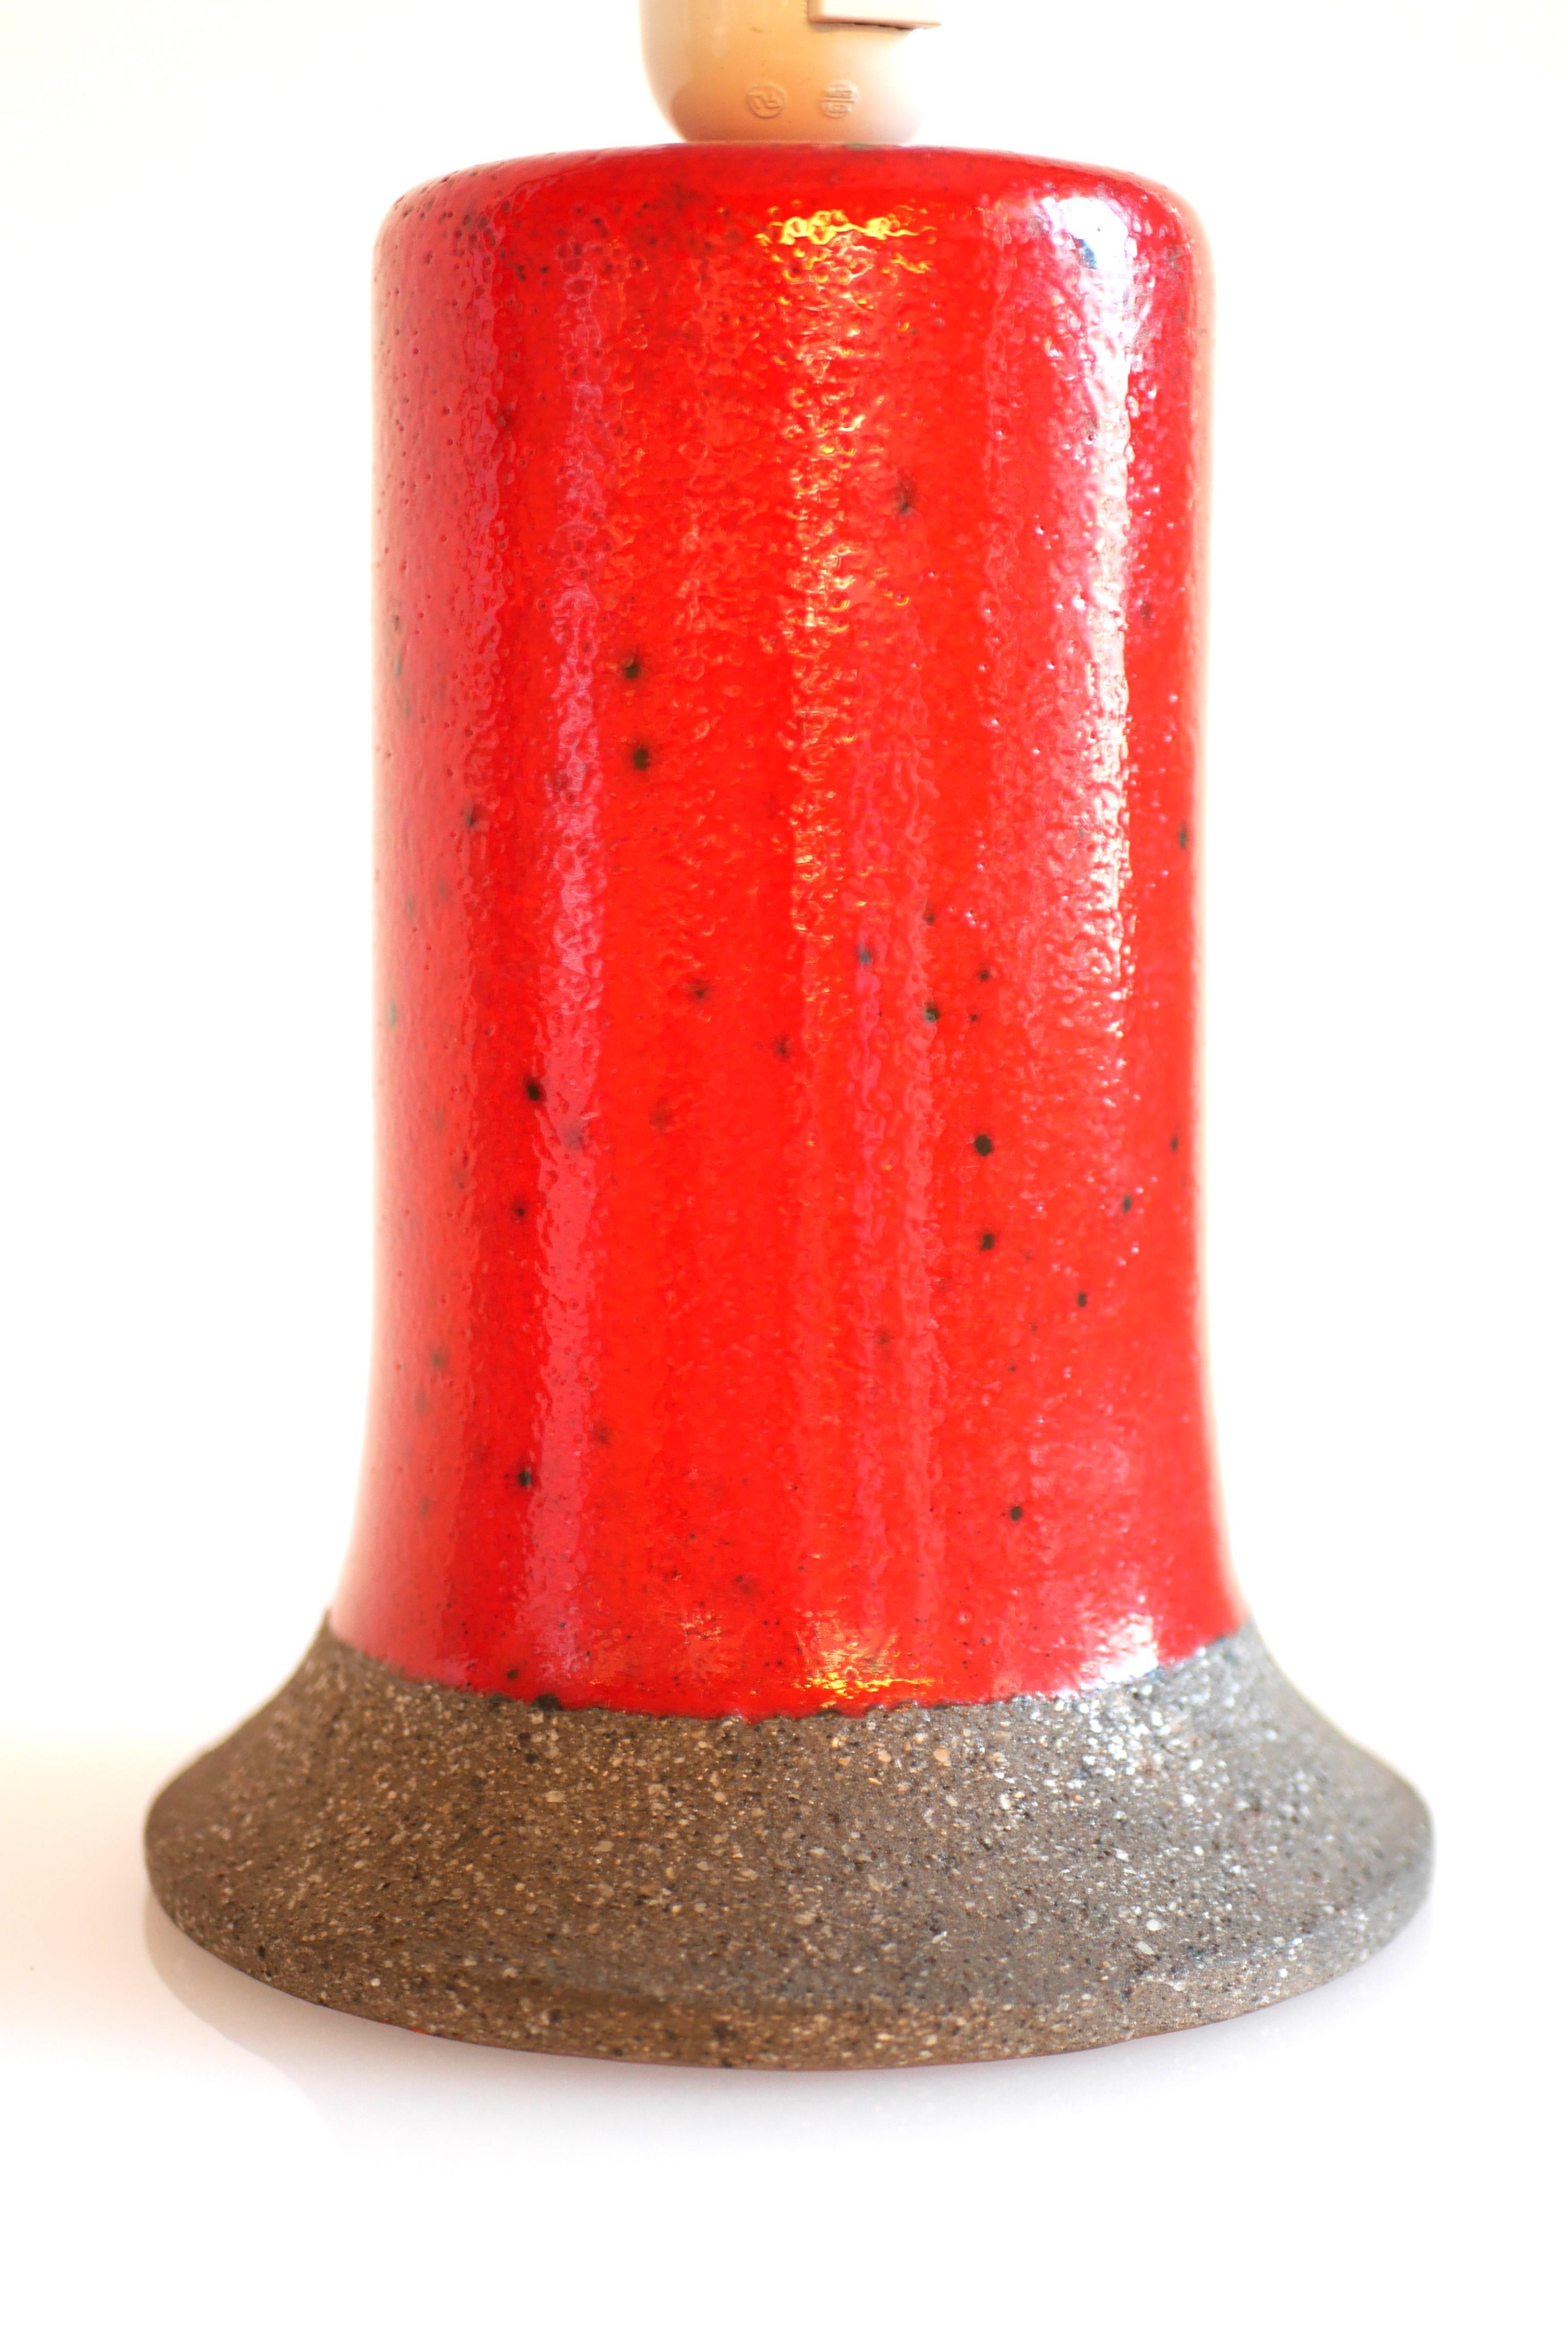 Hand-Crafted Table lamp by Nittsjö, a bright red pottery lamp By Thomas Hellström For Sale